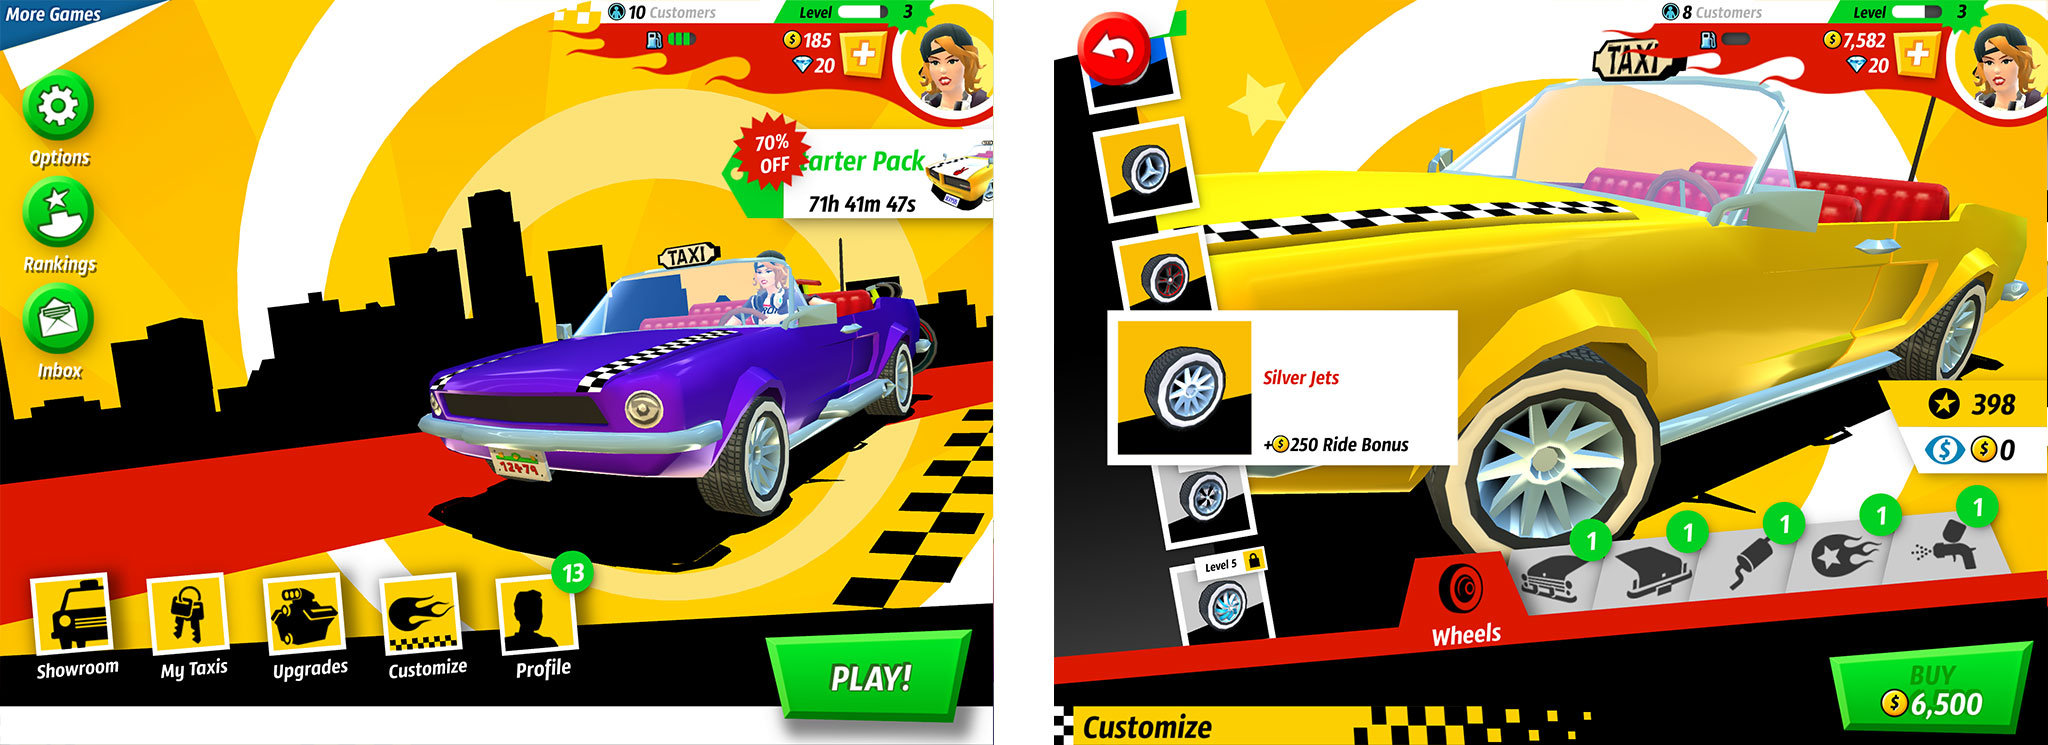 Crazy Taxi: City Rush: Top 10 tips, hints, and cheats you need to know!